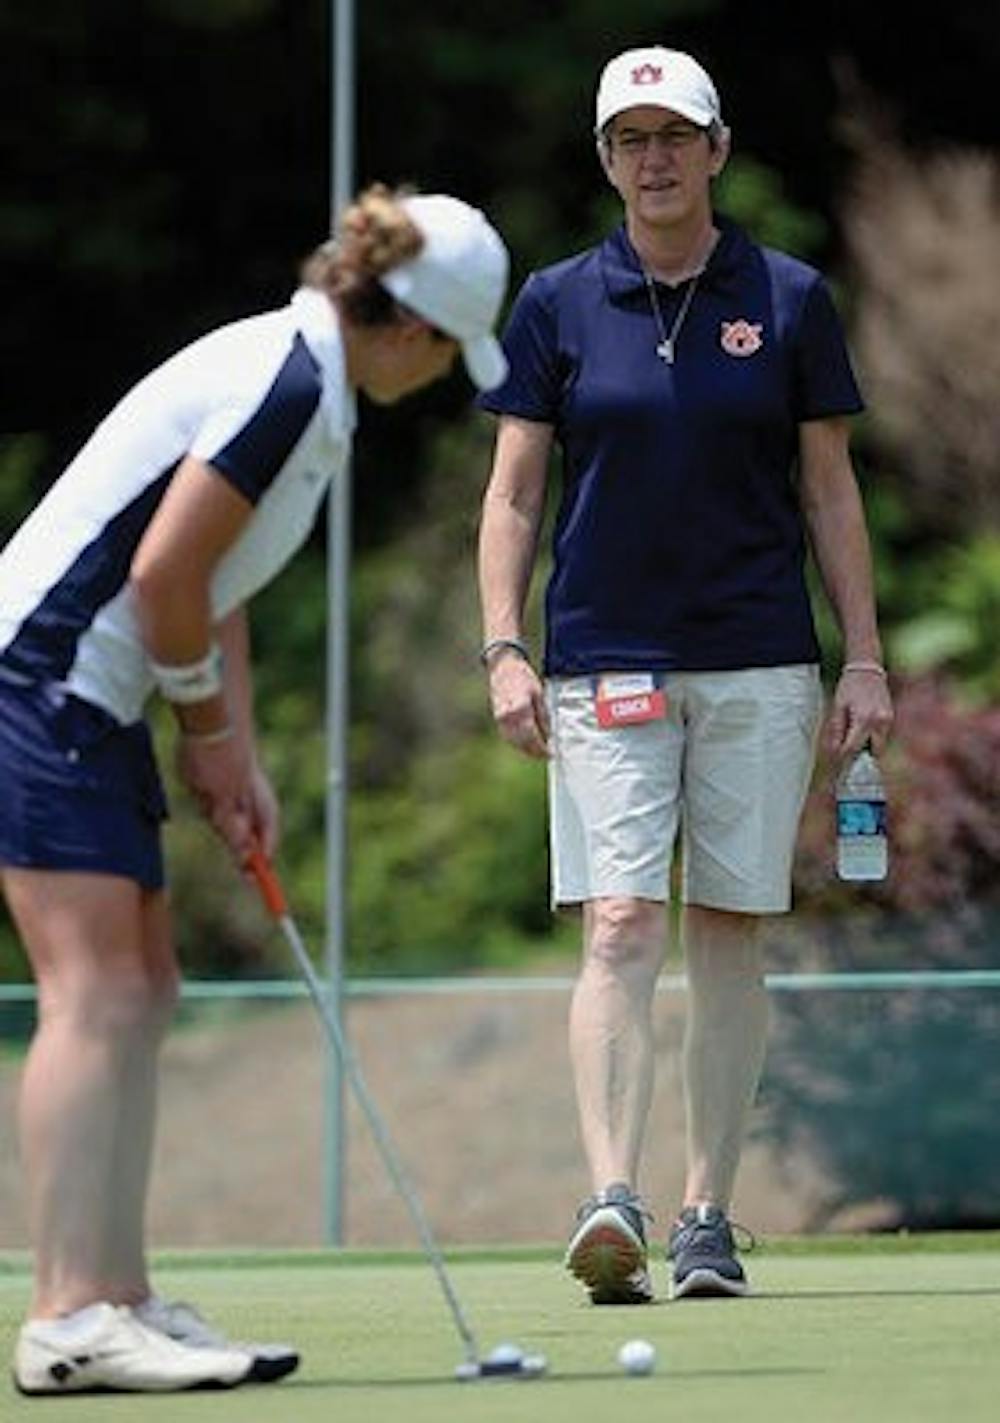 <p>Kim Evans was diagnosed with ovarian cancer in May 2013, but is now cancer free. (Contributed by Auburn Athletics)</p>